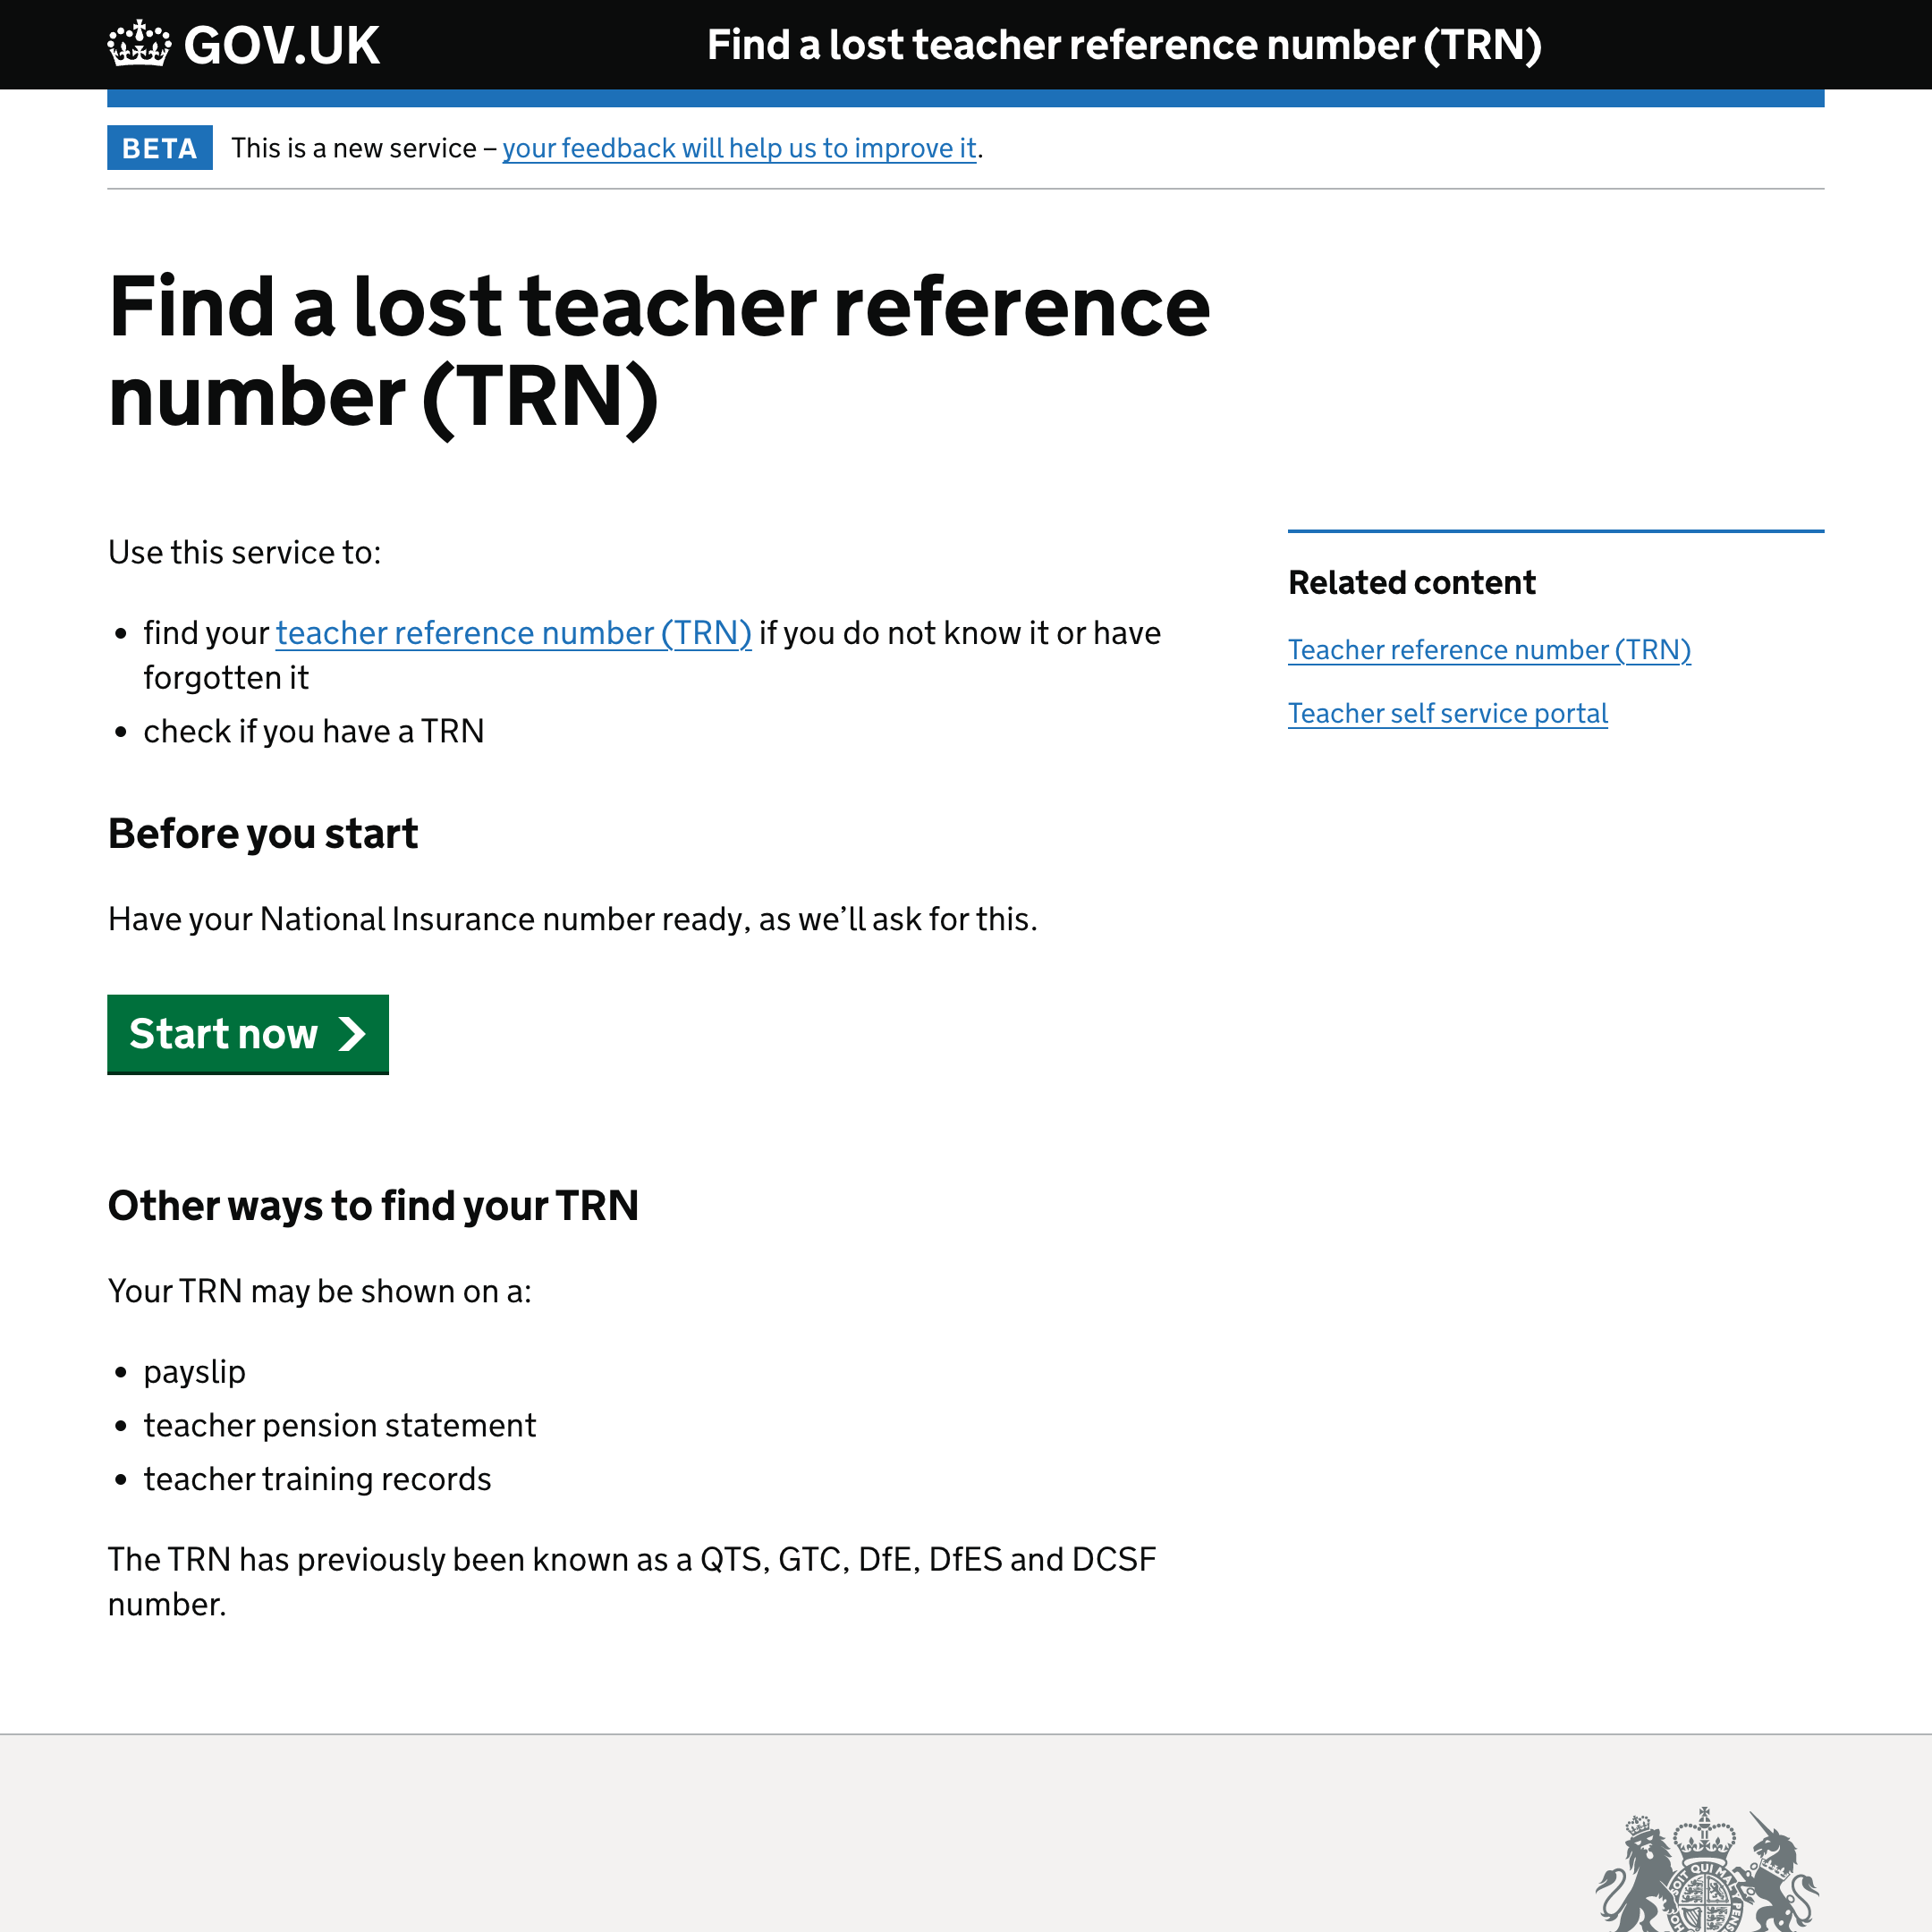 Find a lost teacher reference number (TRN)